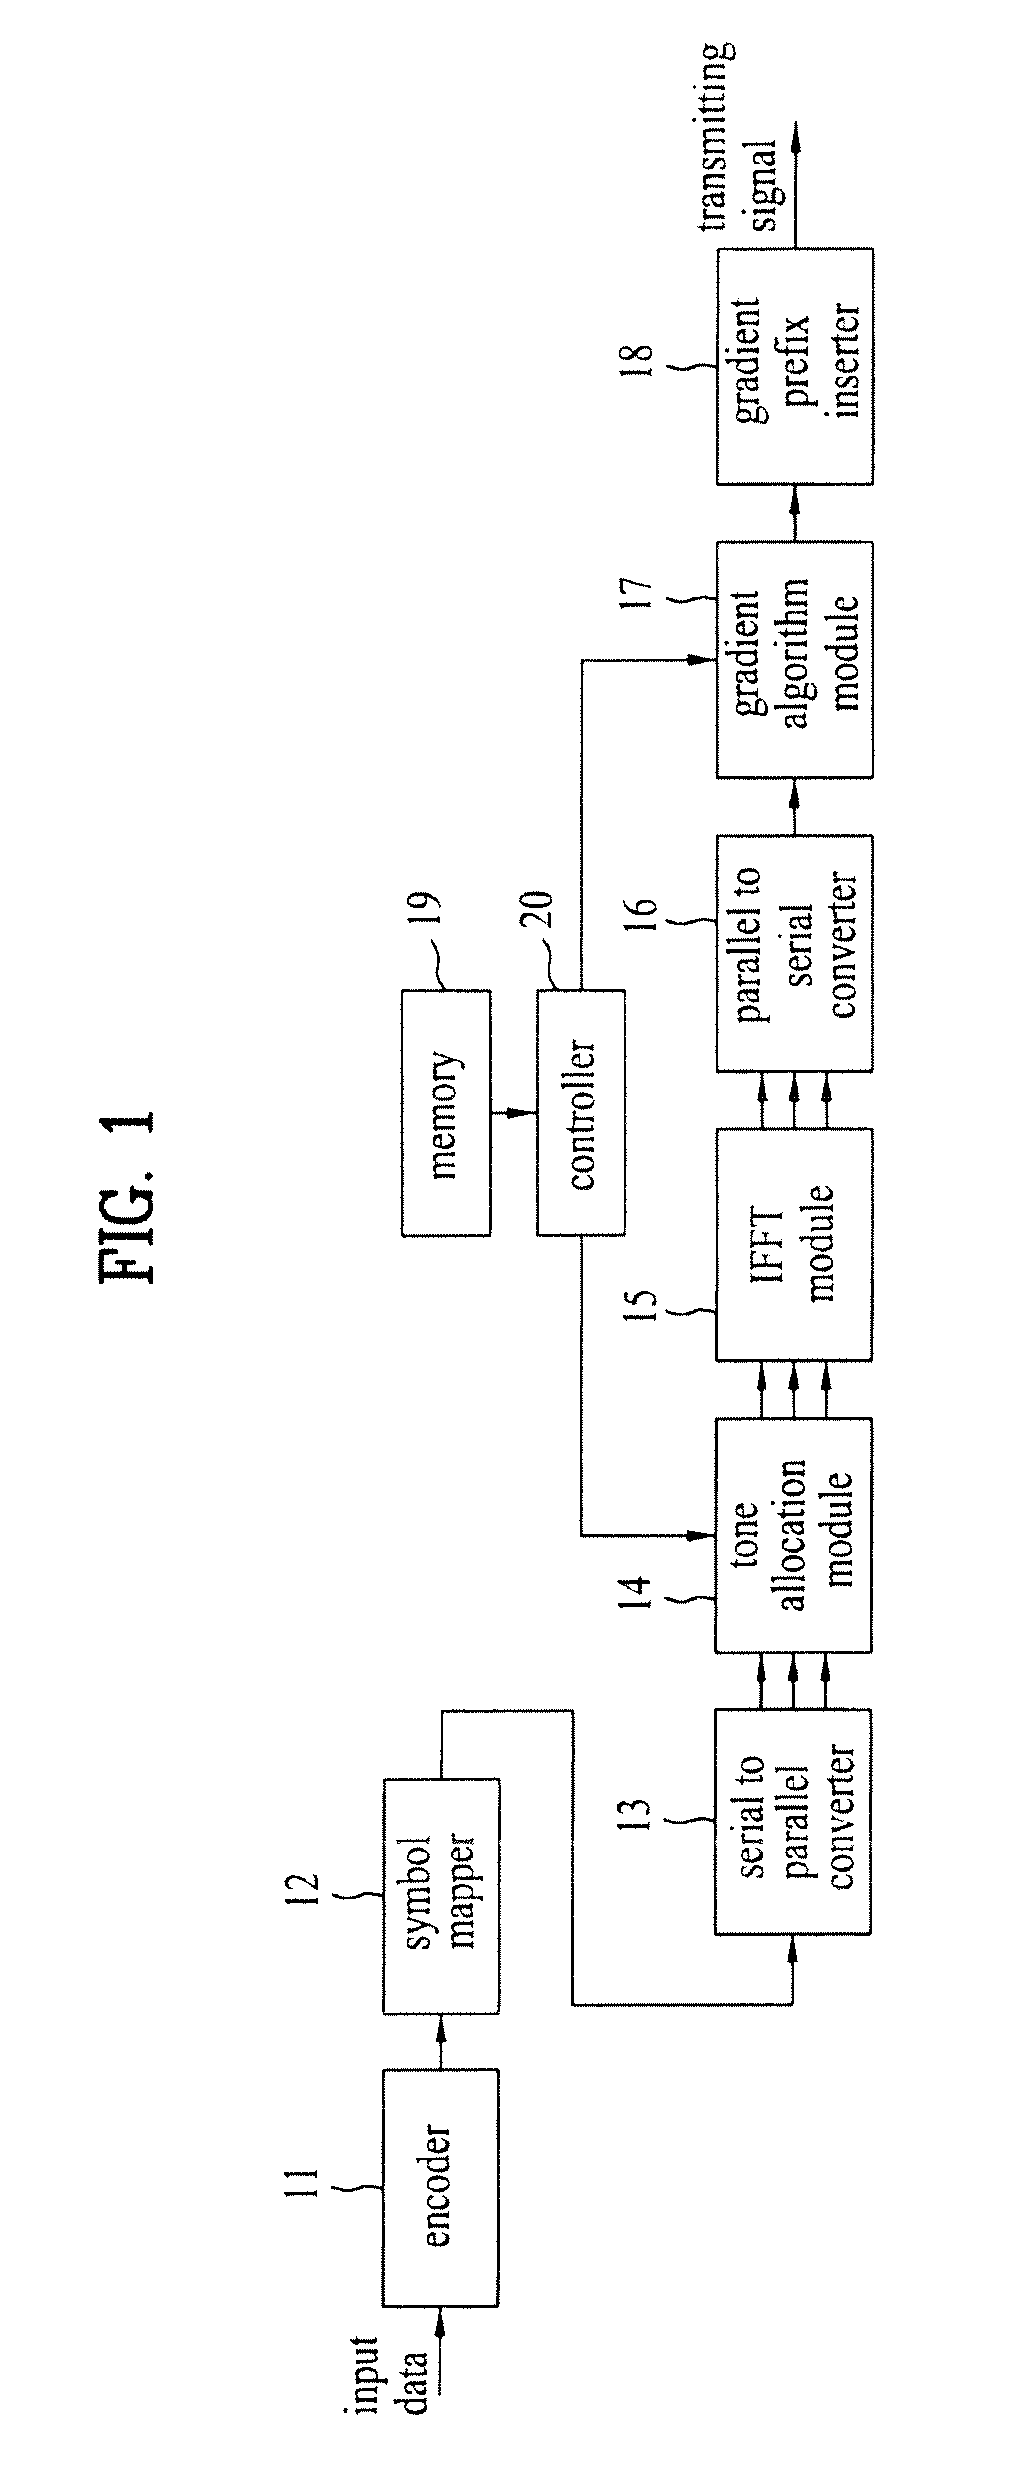 Transmitting apparatus and method using tone reservation in OFDM system